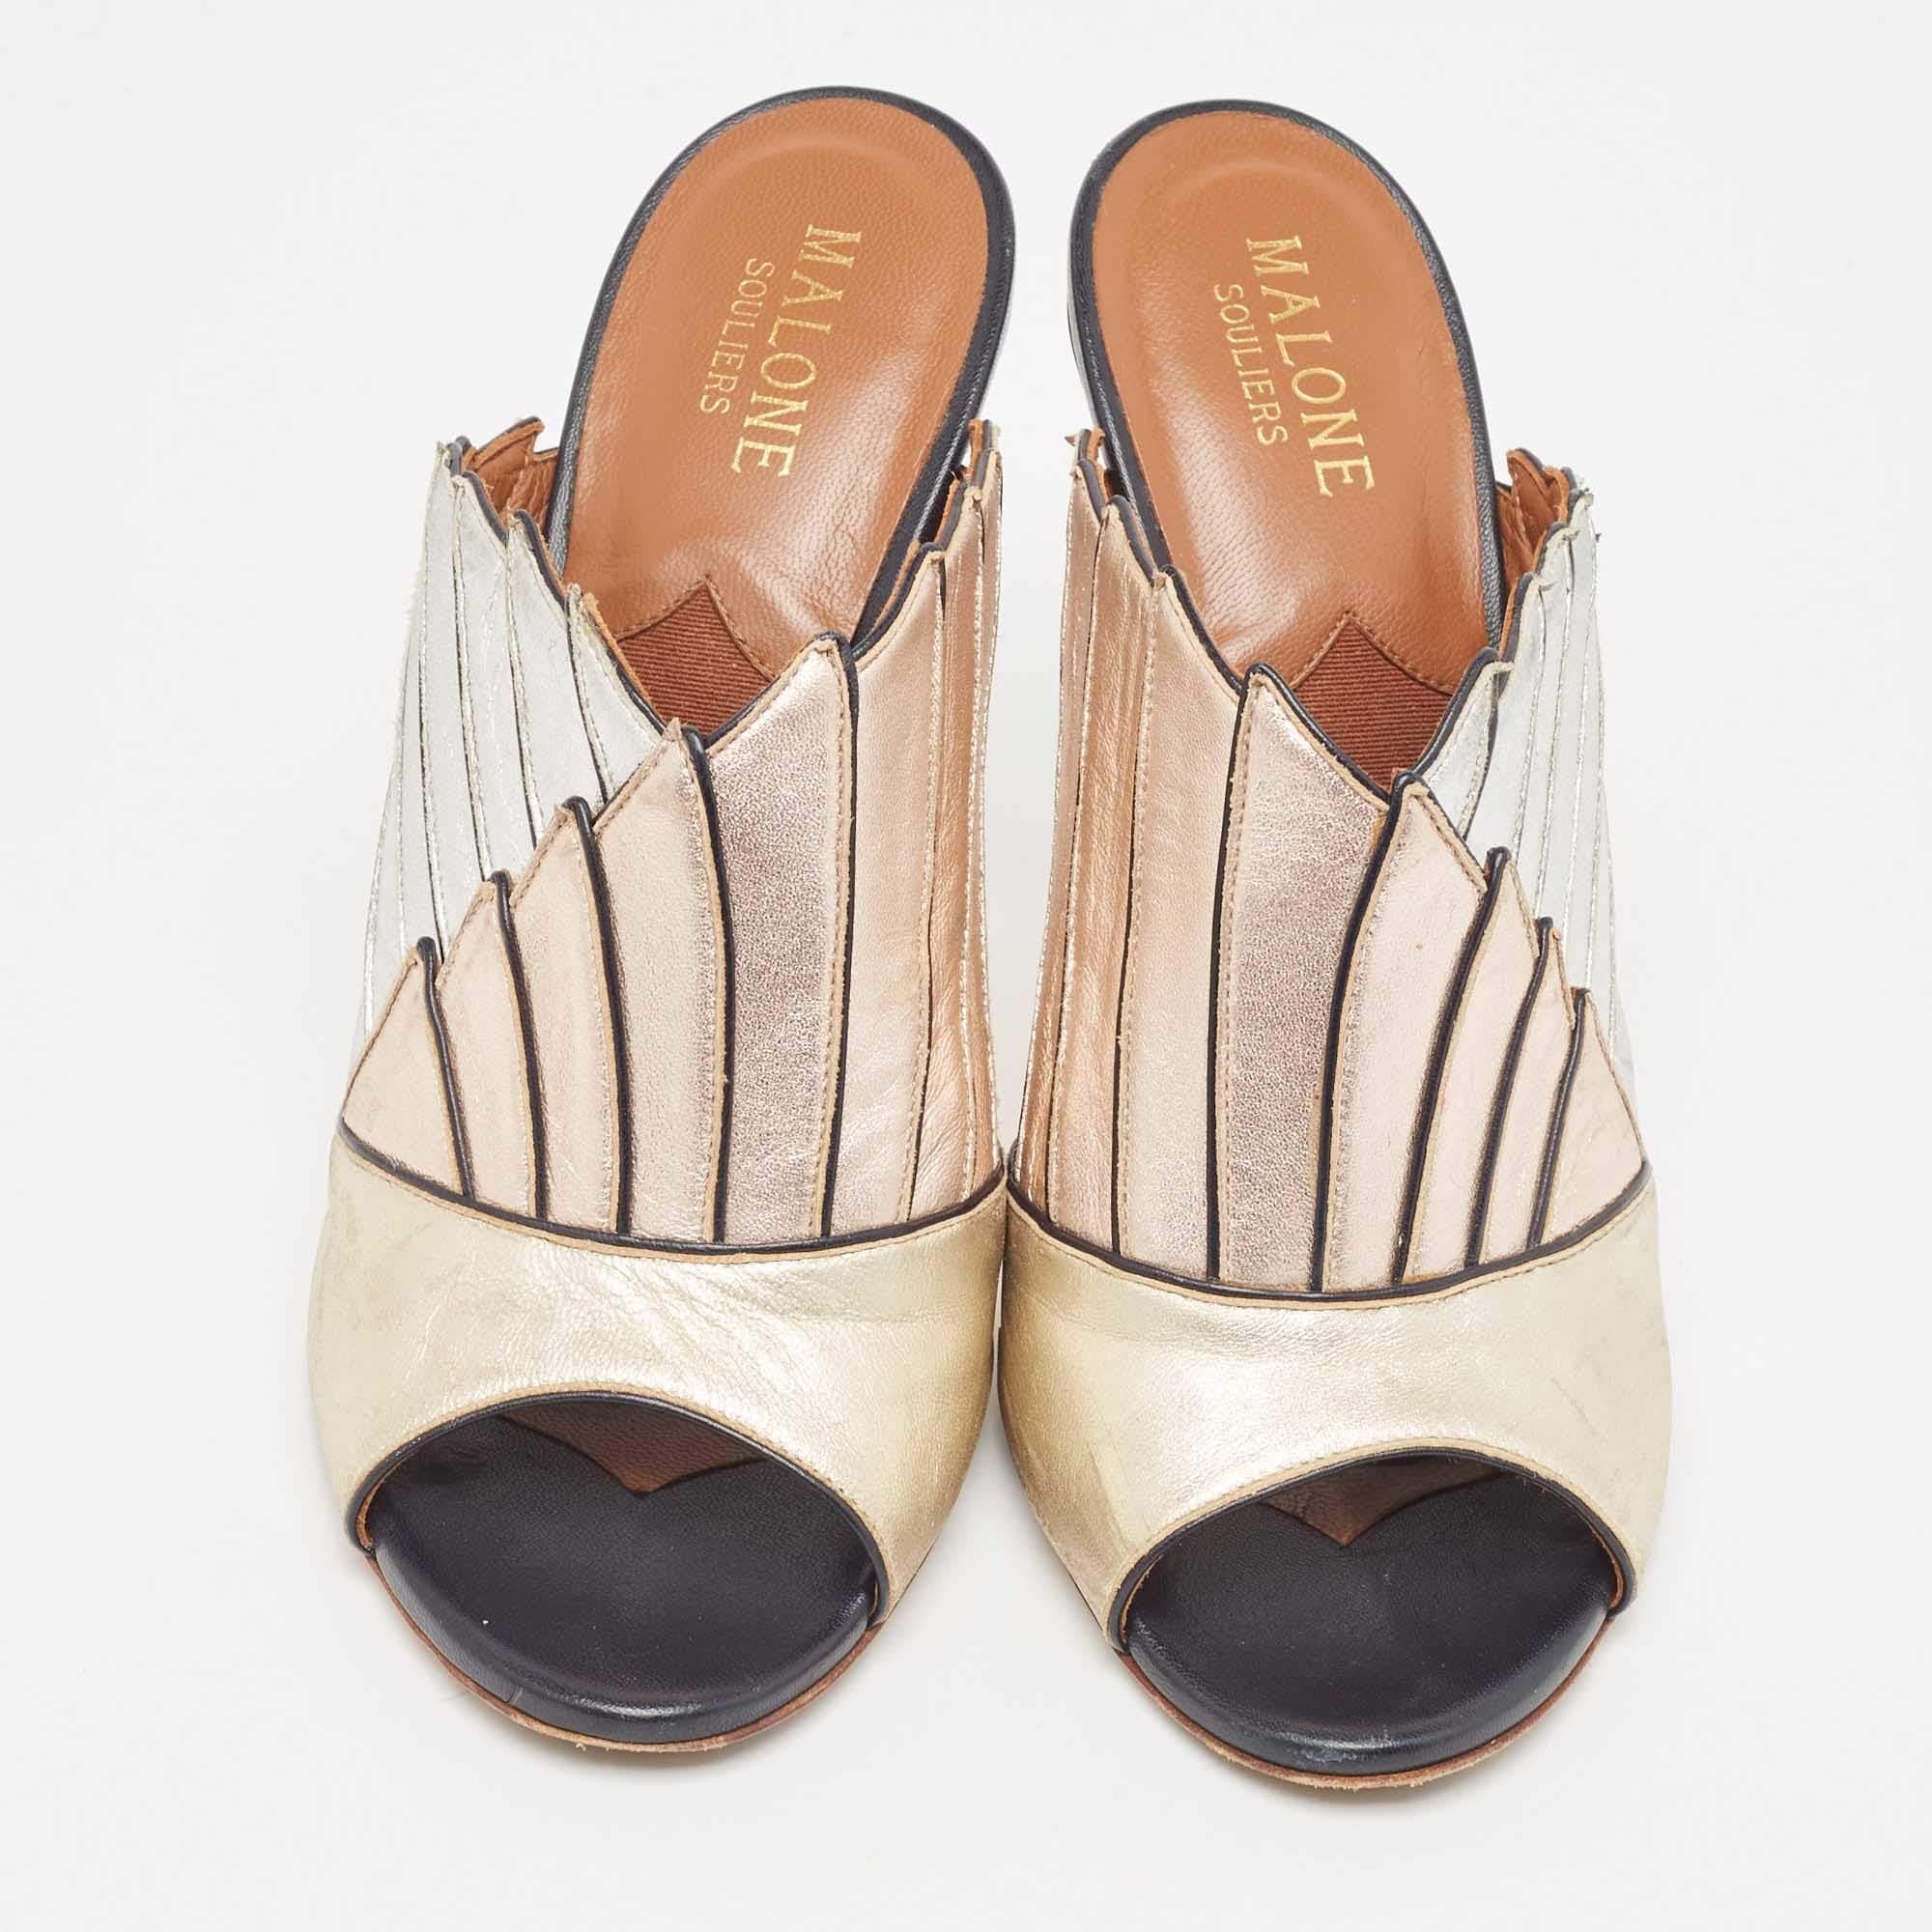 A pair to admire and treasure is this tricolor one by Malone Souliers. On the shoes, one can see an intricate design and an eye-catching design. They have leather uppers, open toes and 12cm heels.

